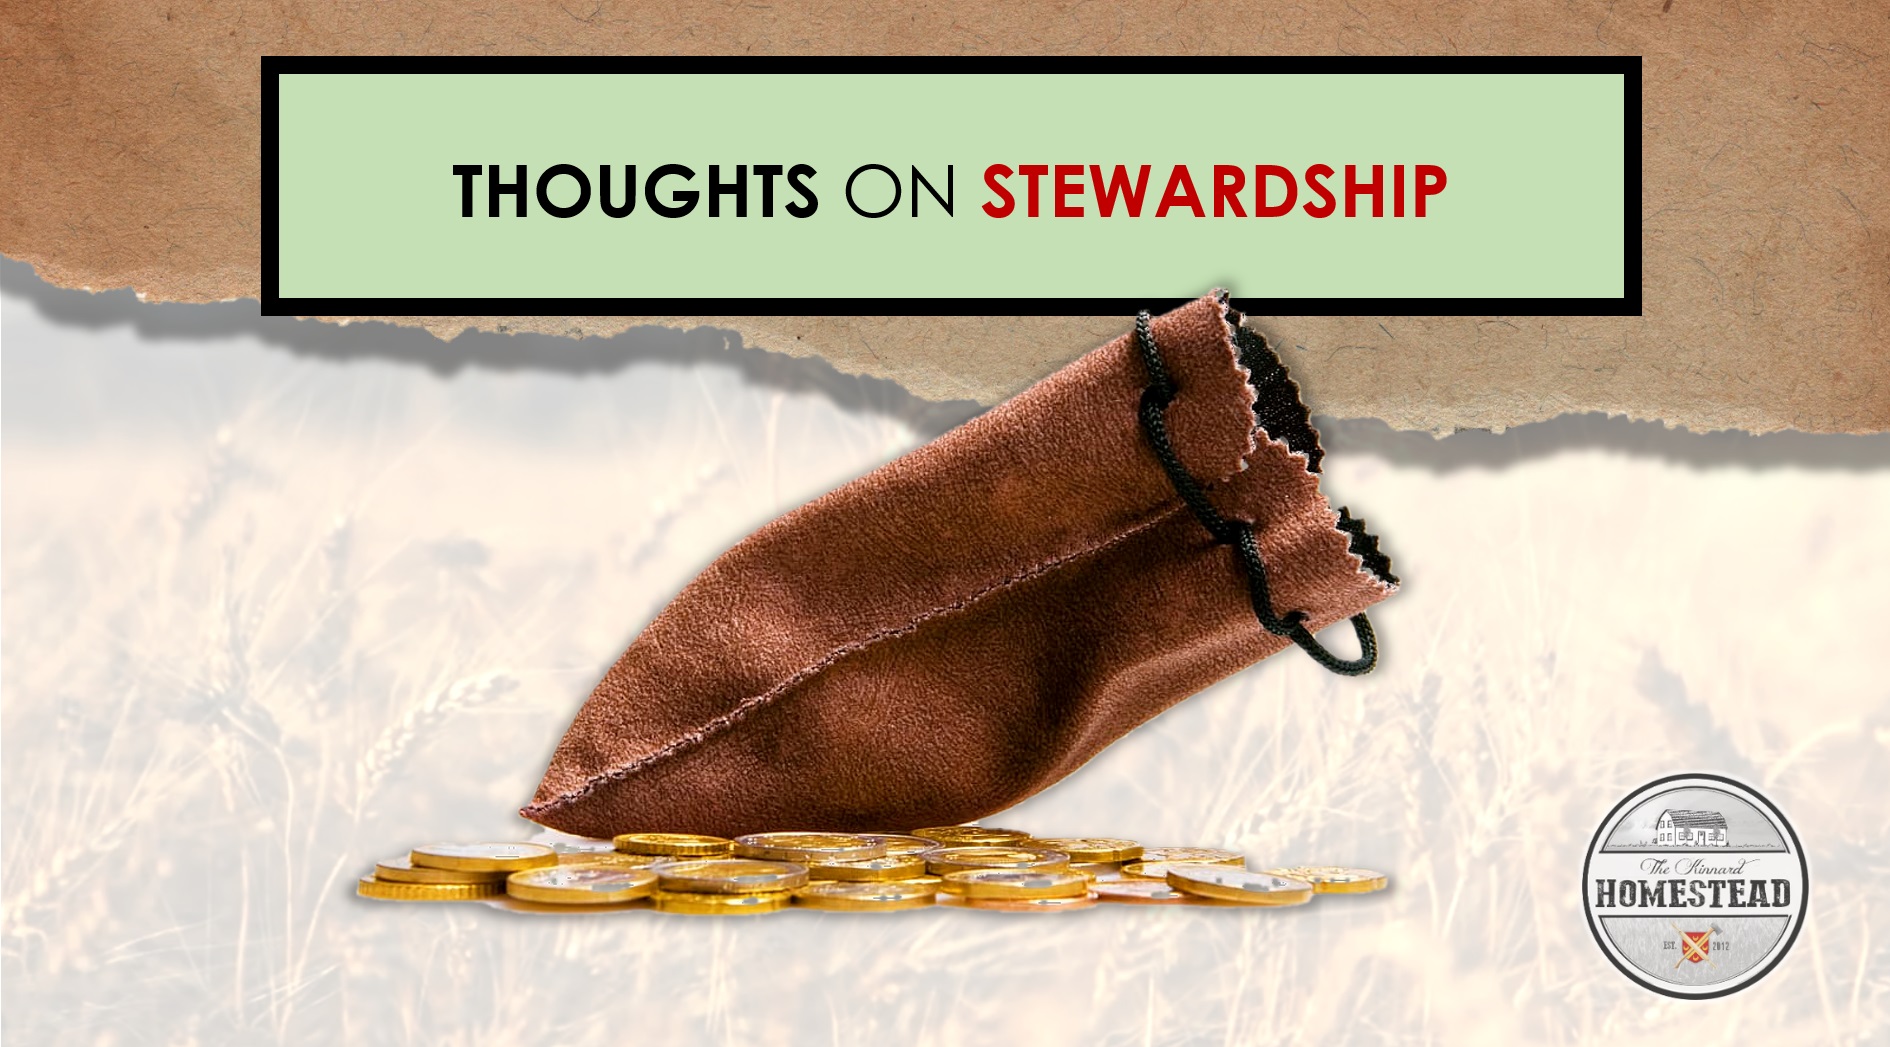 Thoughts on Stewardship